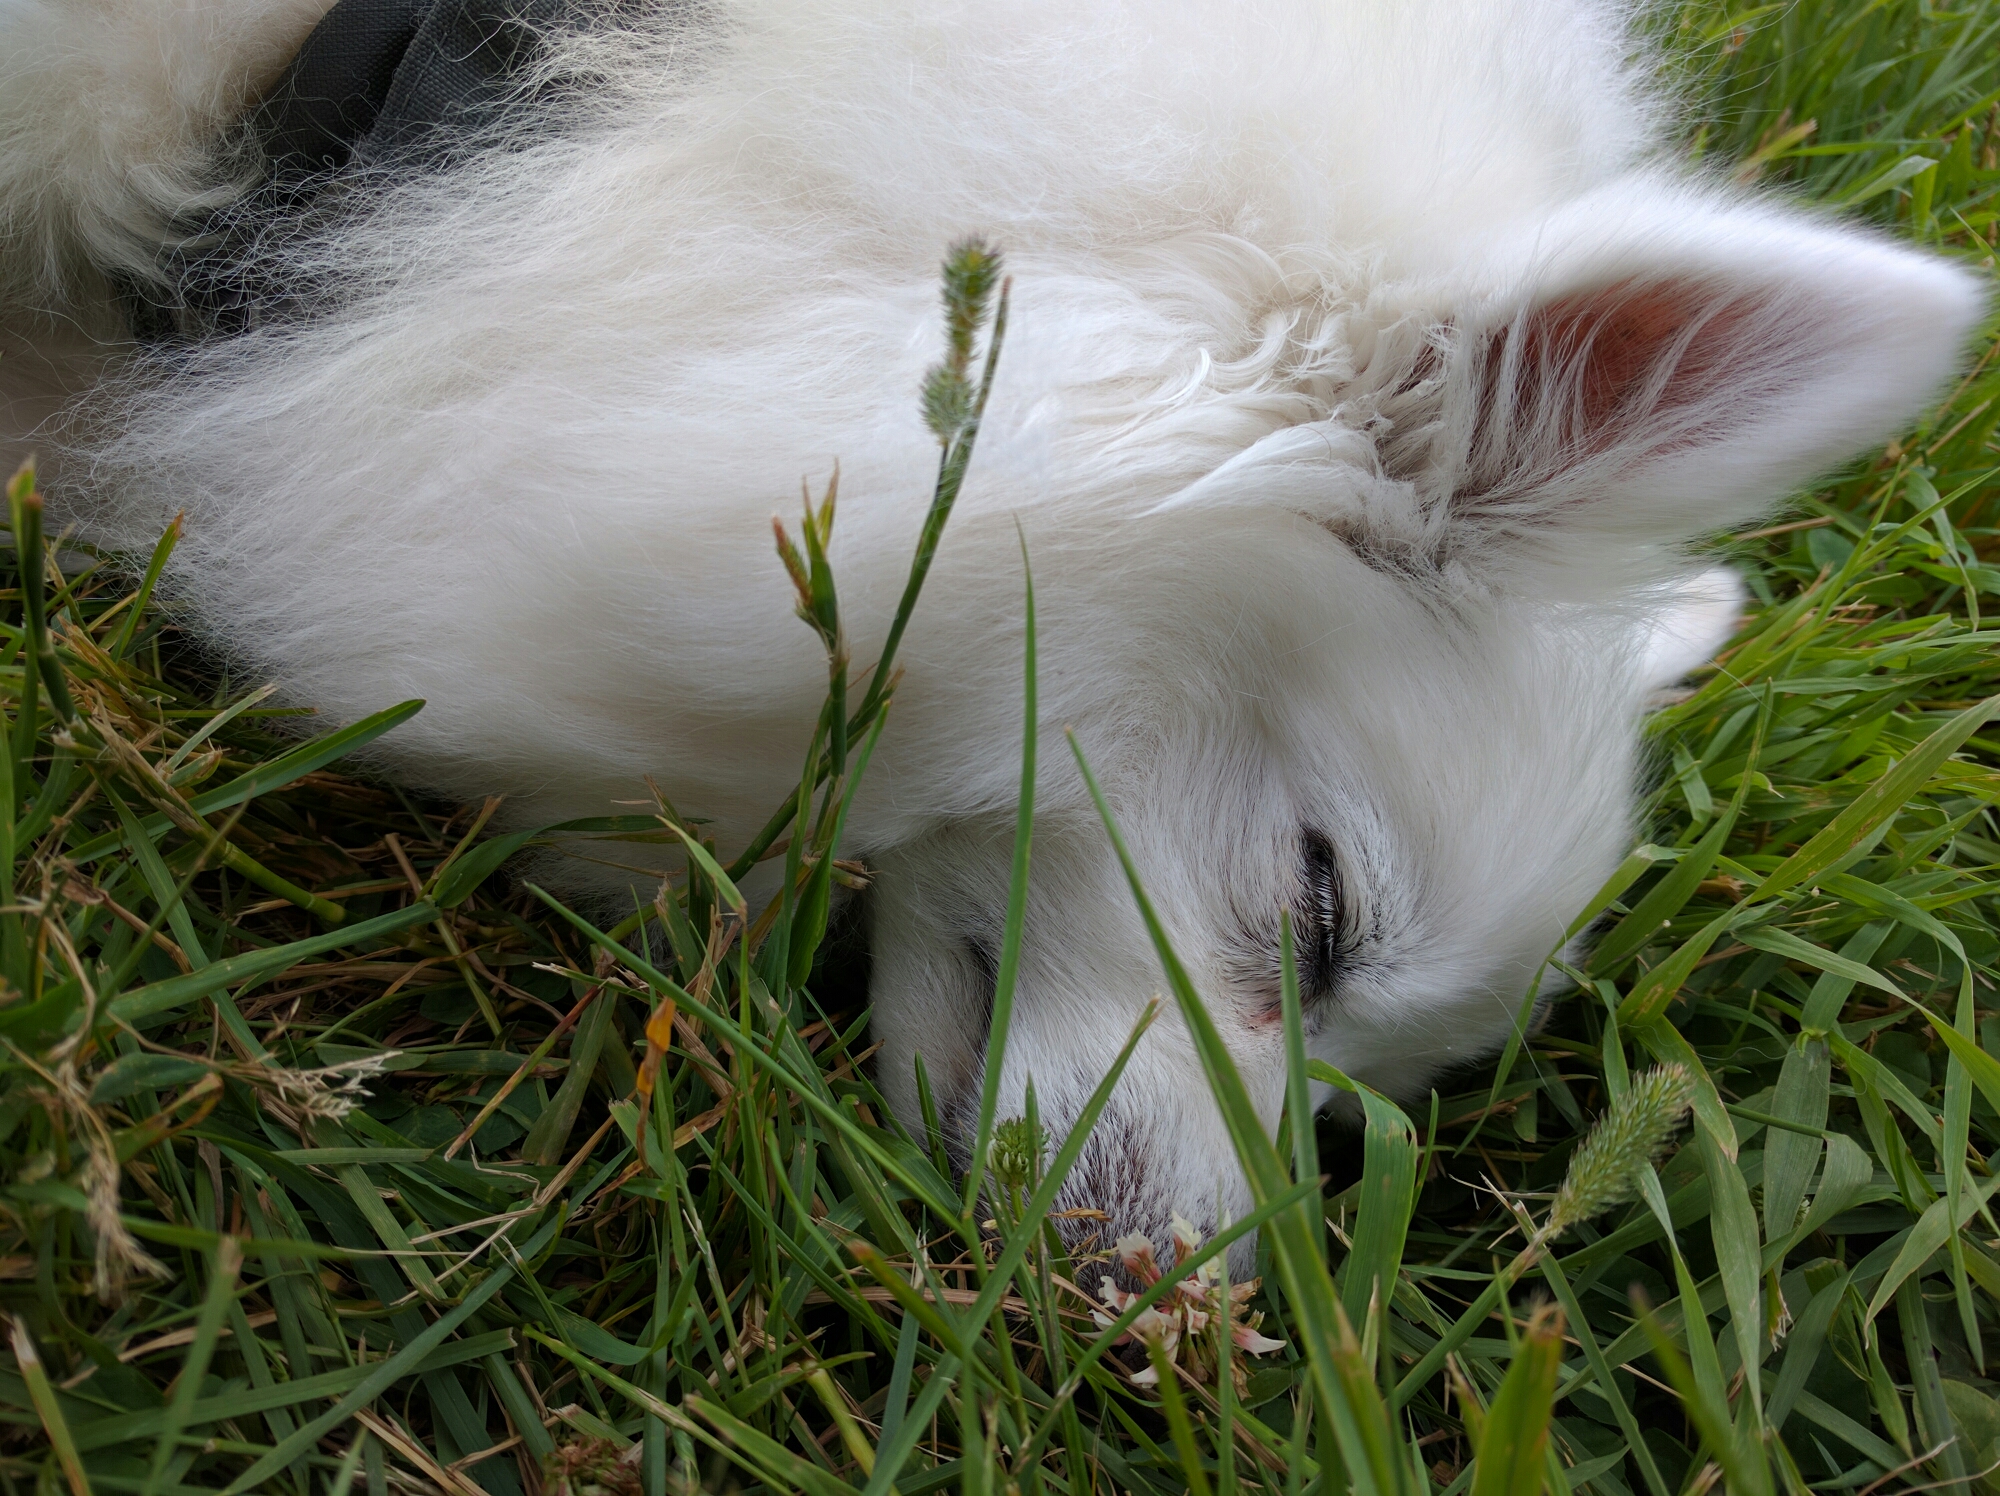 Fletcher napping in the grass.